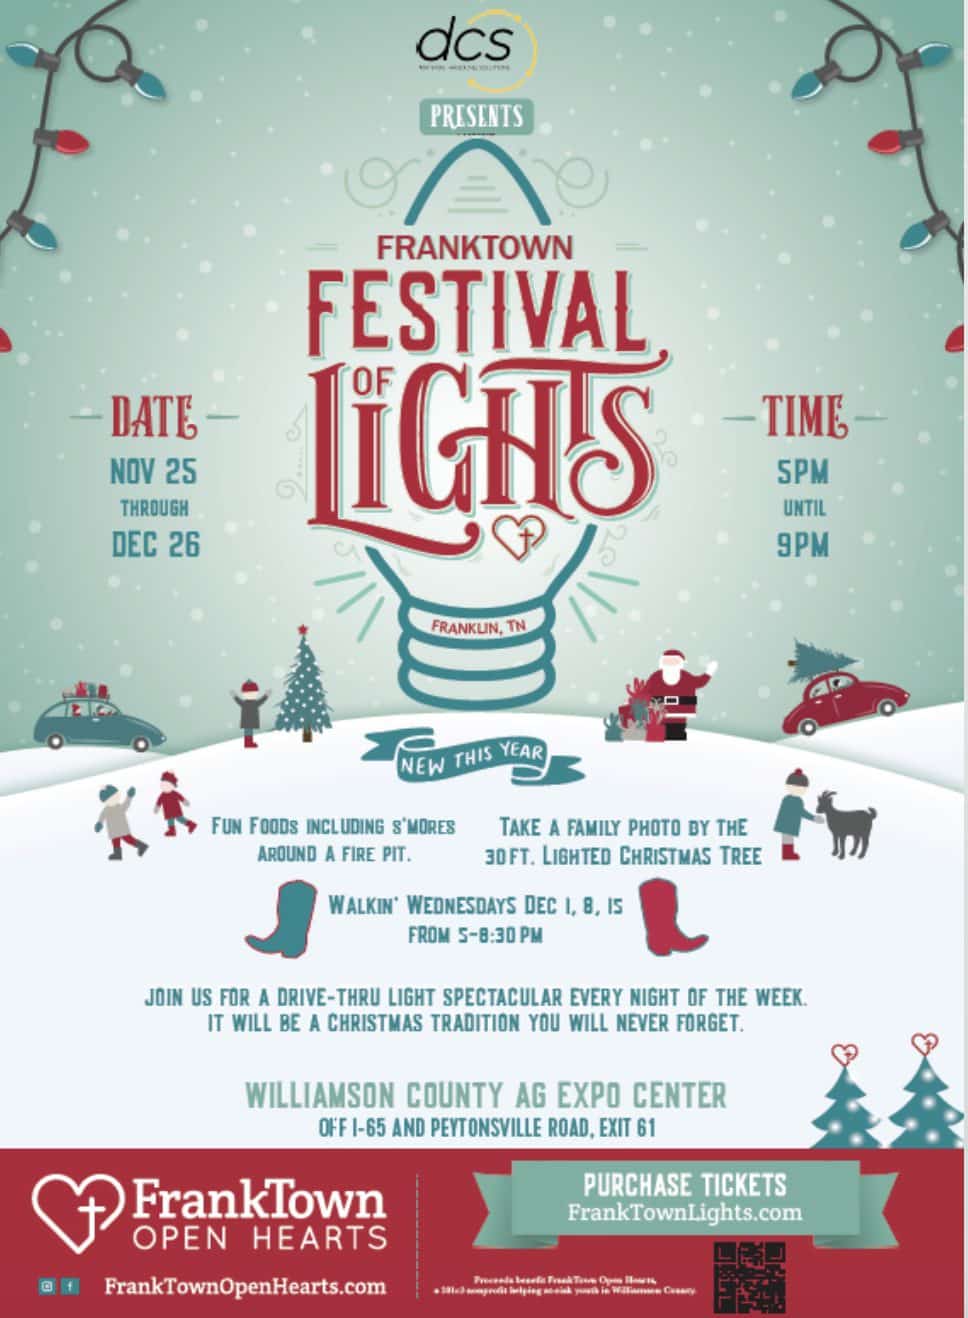 FrankTown Festival of Lights in Franklin, TN, come experience FrankTown Festival of Lights for family fun with the annual Williamson County drive-thru holiday light display.